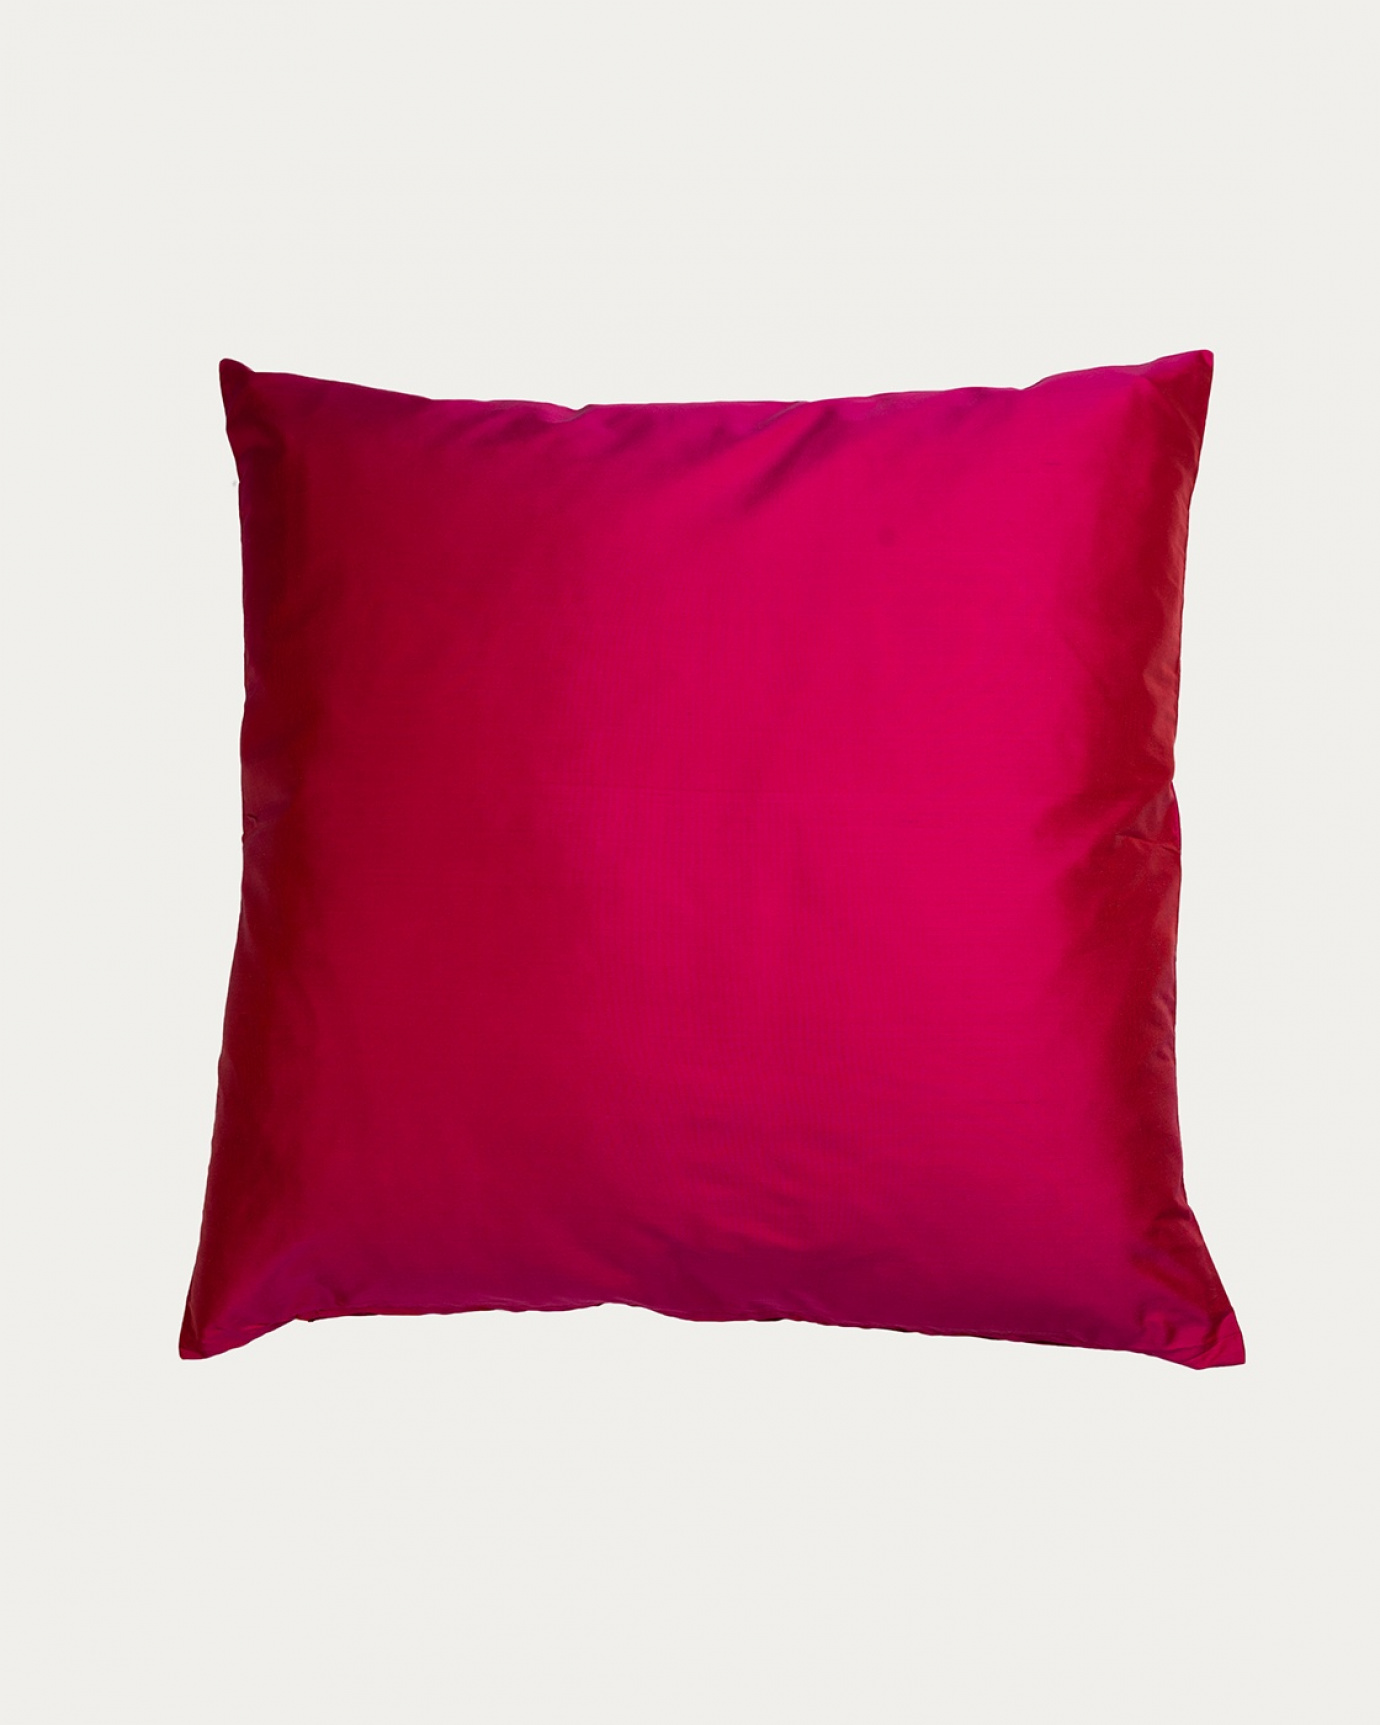 Product image fuchsia red SILK cushion cover made of 100% dupion silk that gives a nice lustre from LINUM DESIGN. Size 50x50 cm.